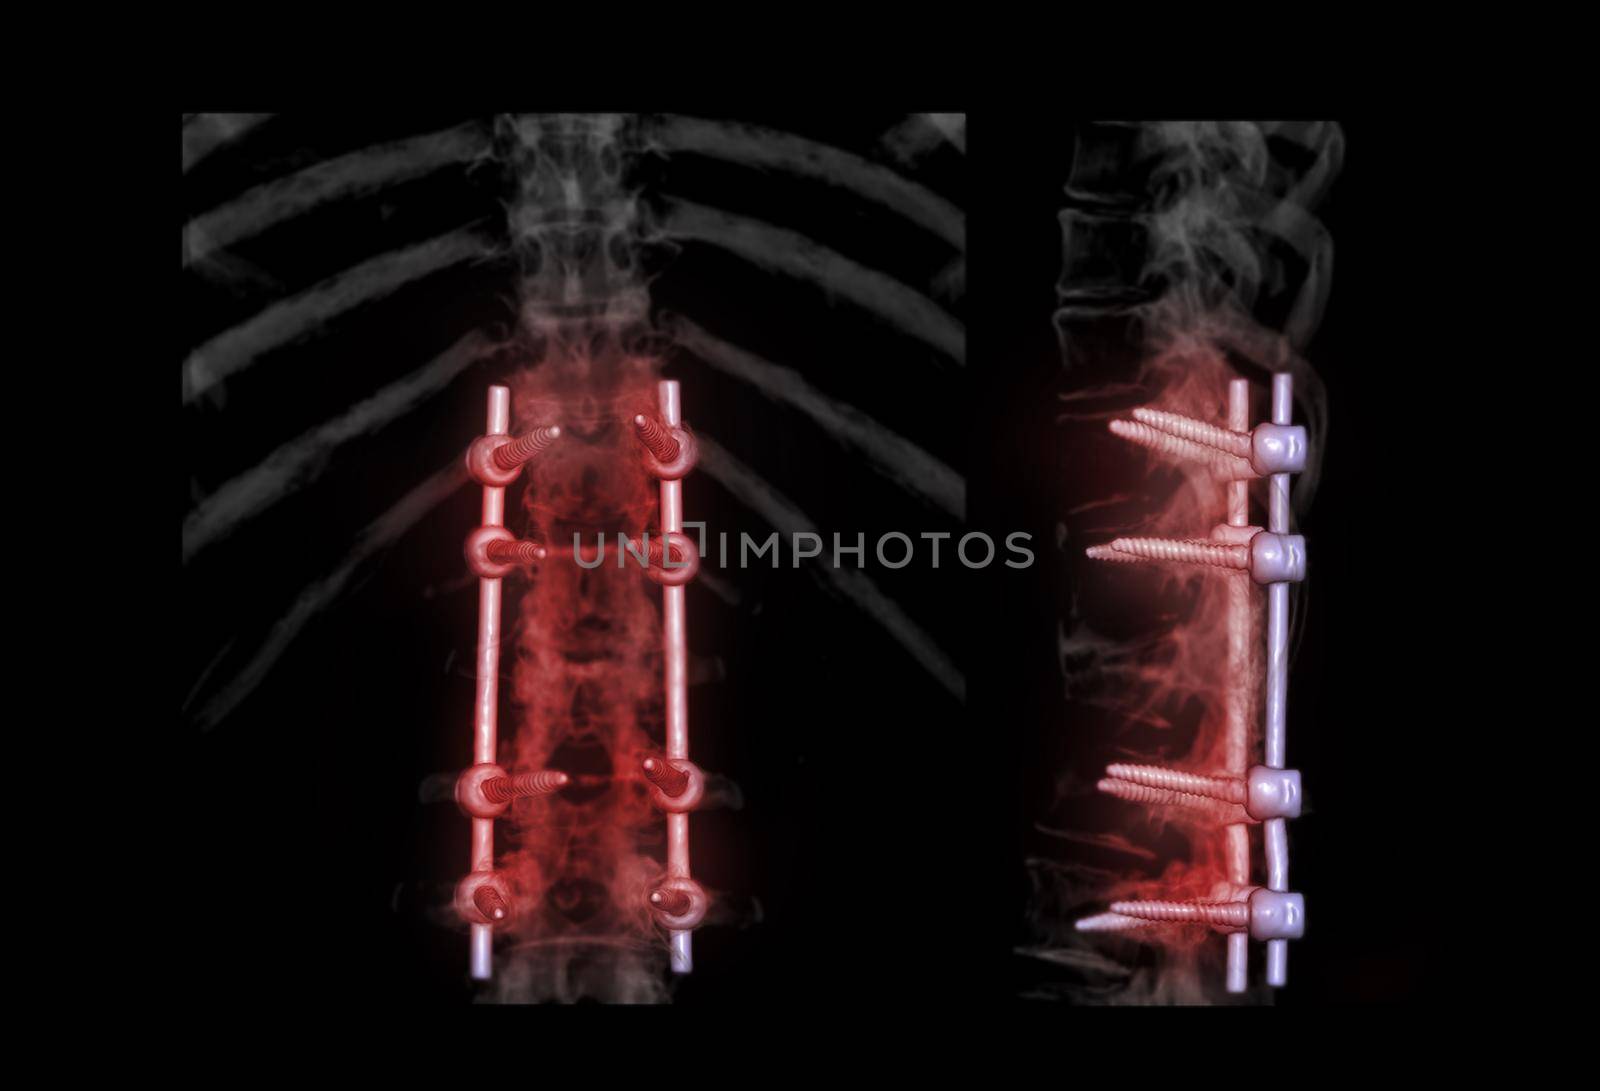 lumbar spine AP and Lateral view for diagnosis spinal canal stenosis and degenerative disc disease showing pedicle screw implant after surgical decompression and spinal fusion. by samunella